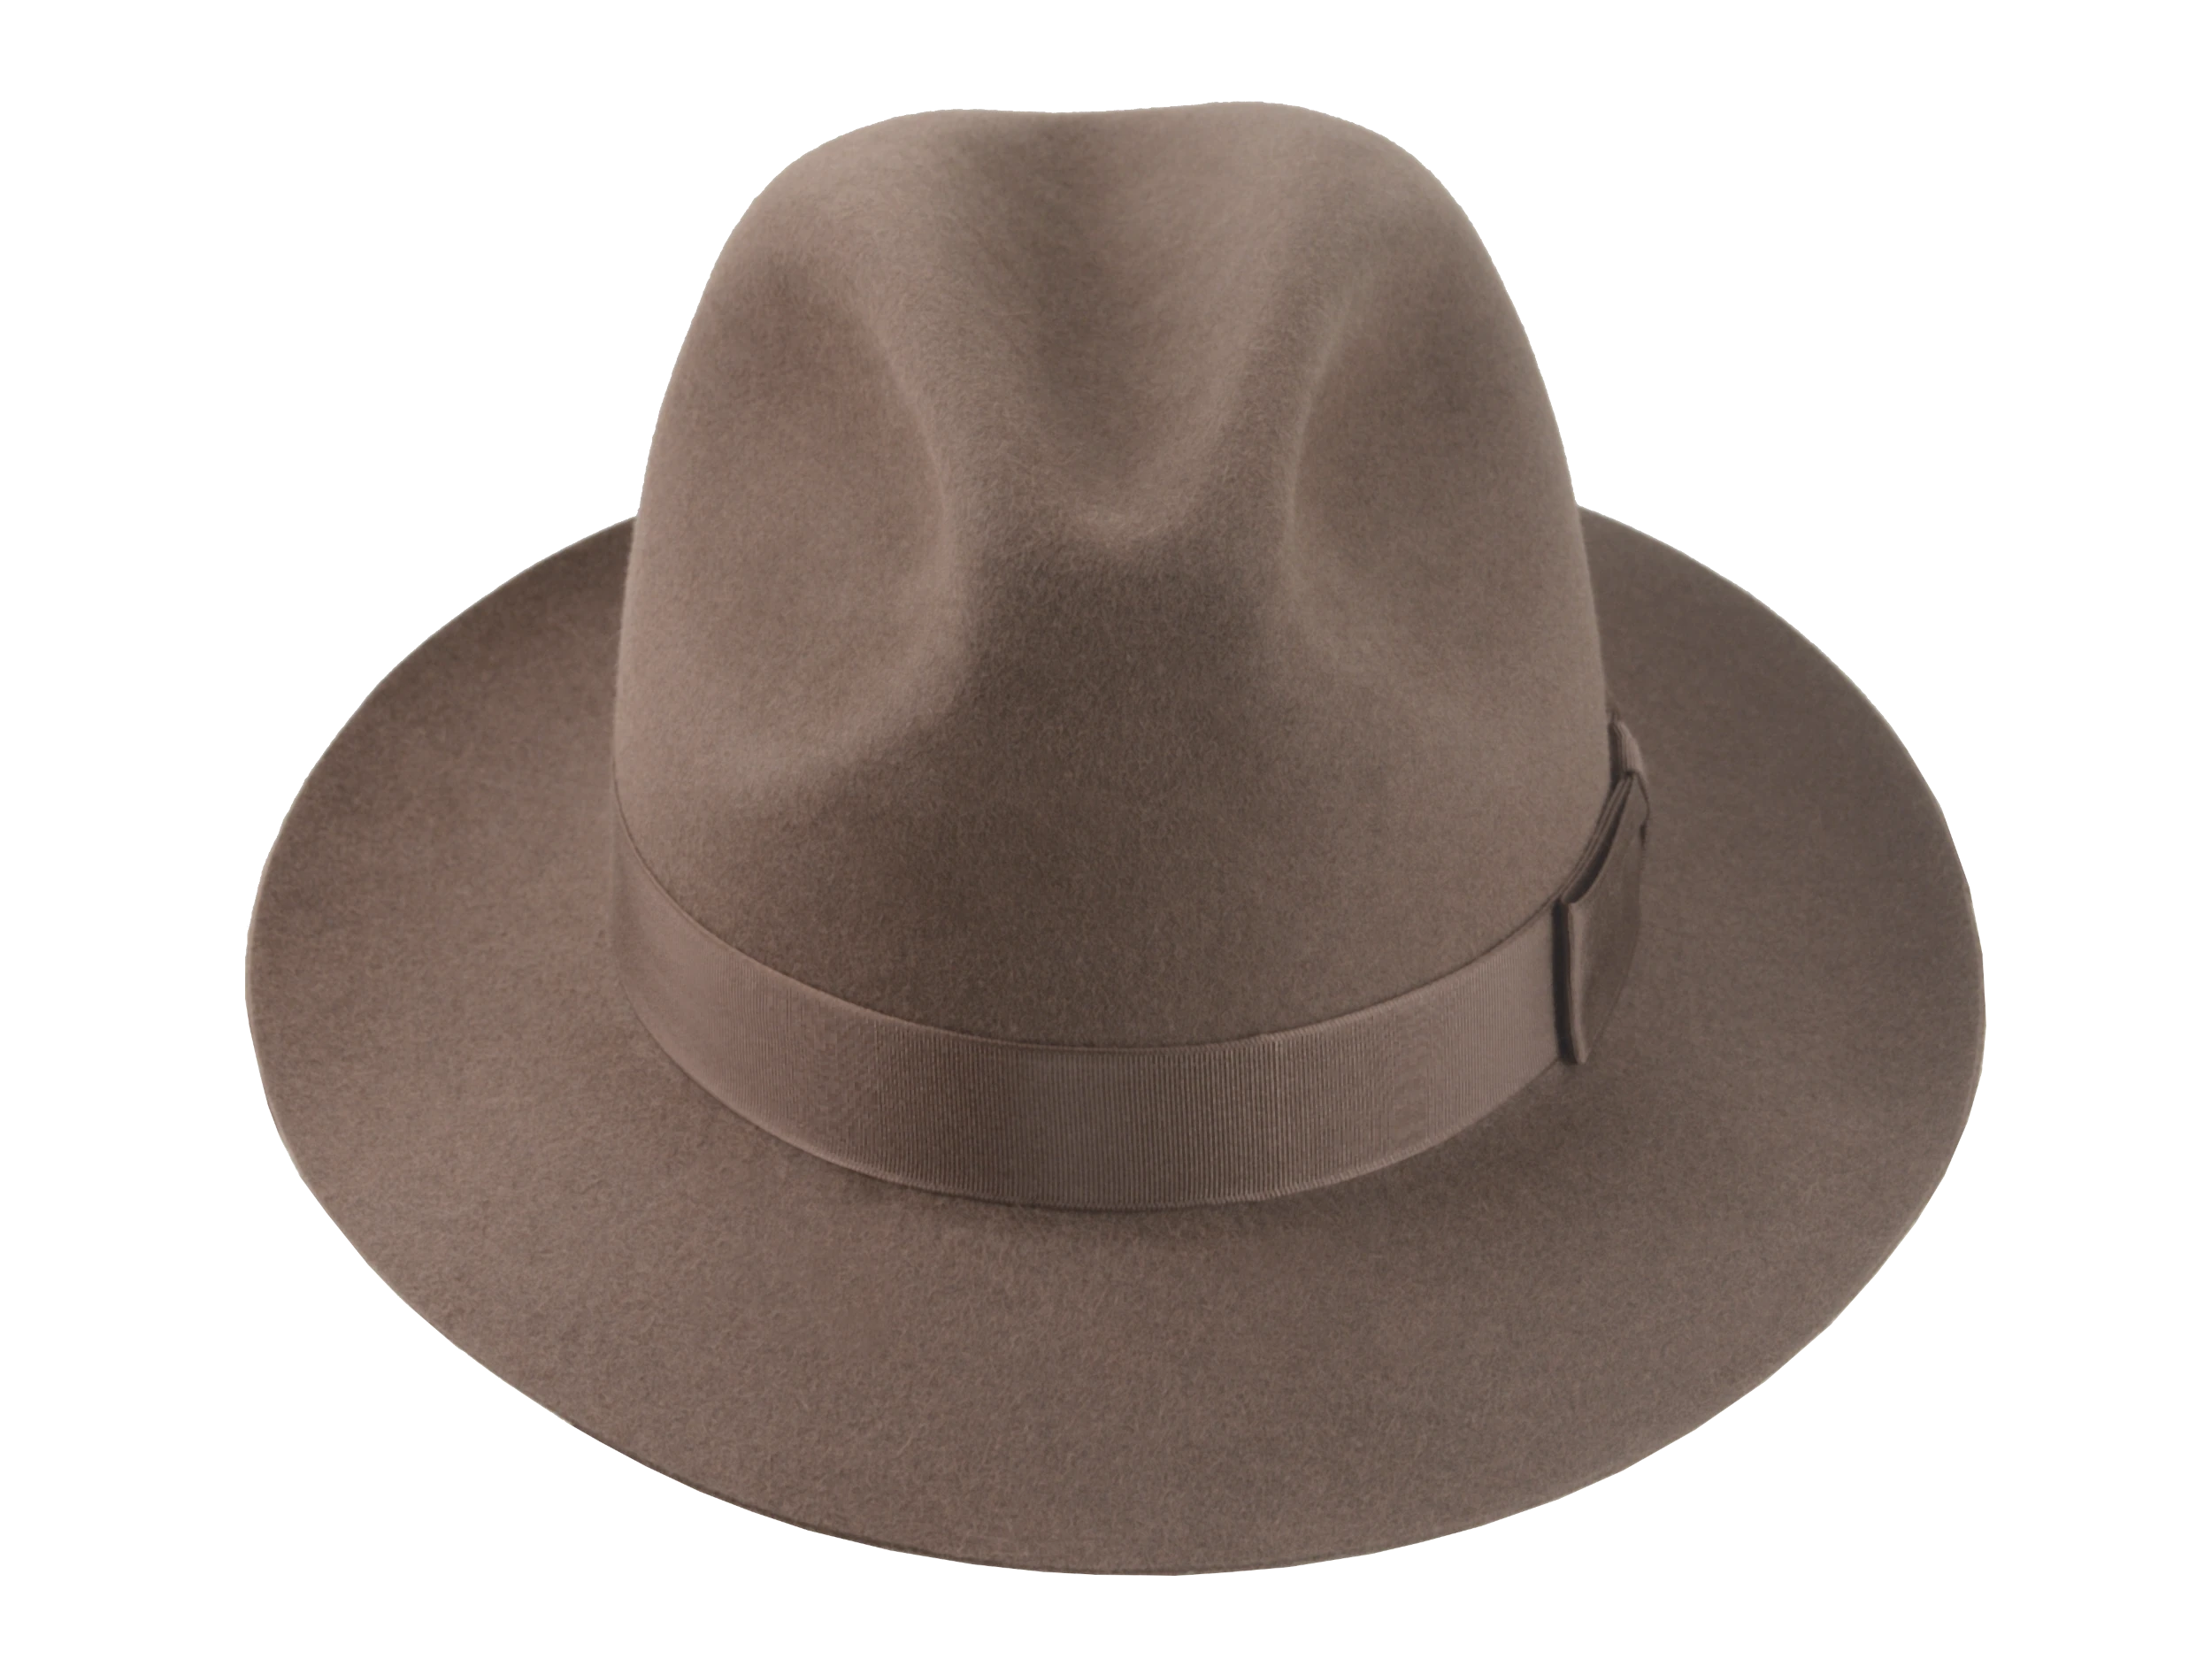 The Fortis: Top-down view revealing the Fedora's exclusive center-dent crown design | Agnoulita Hats